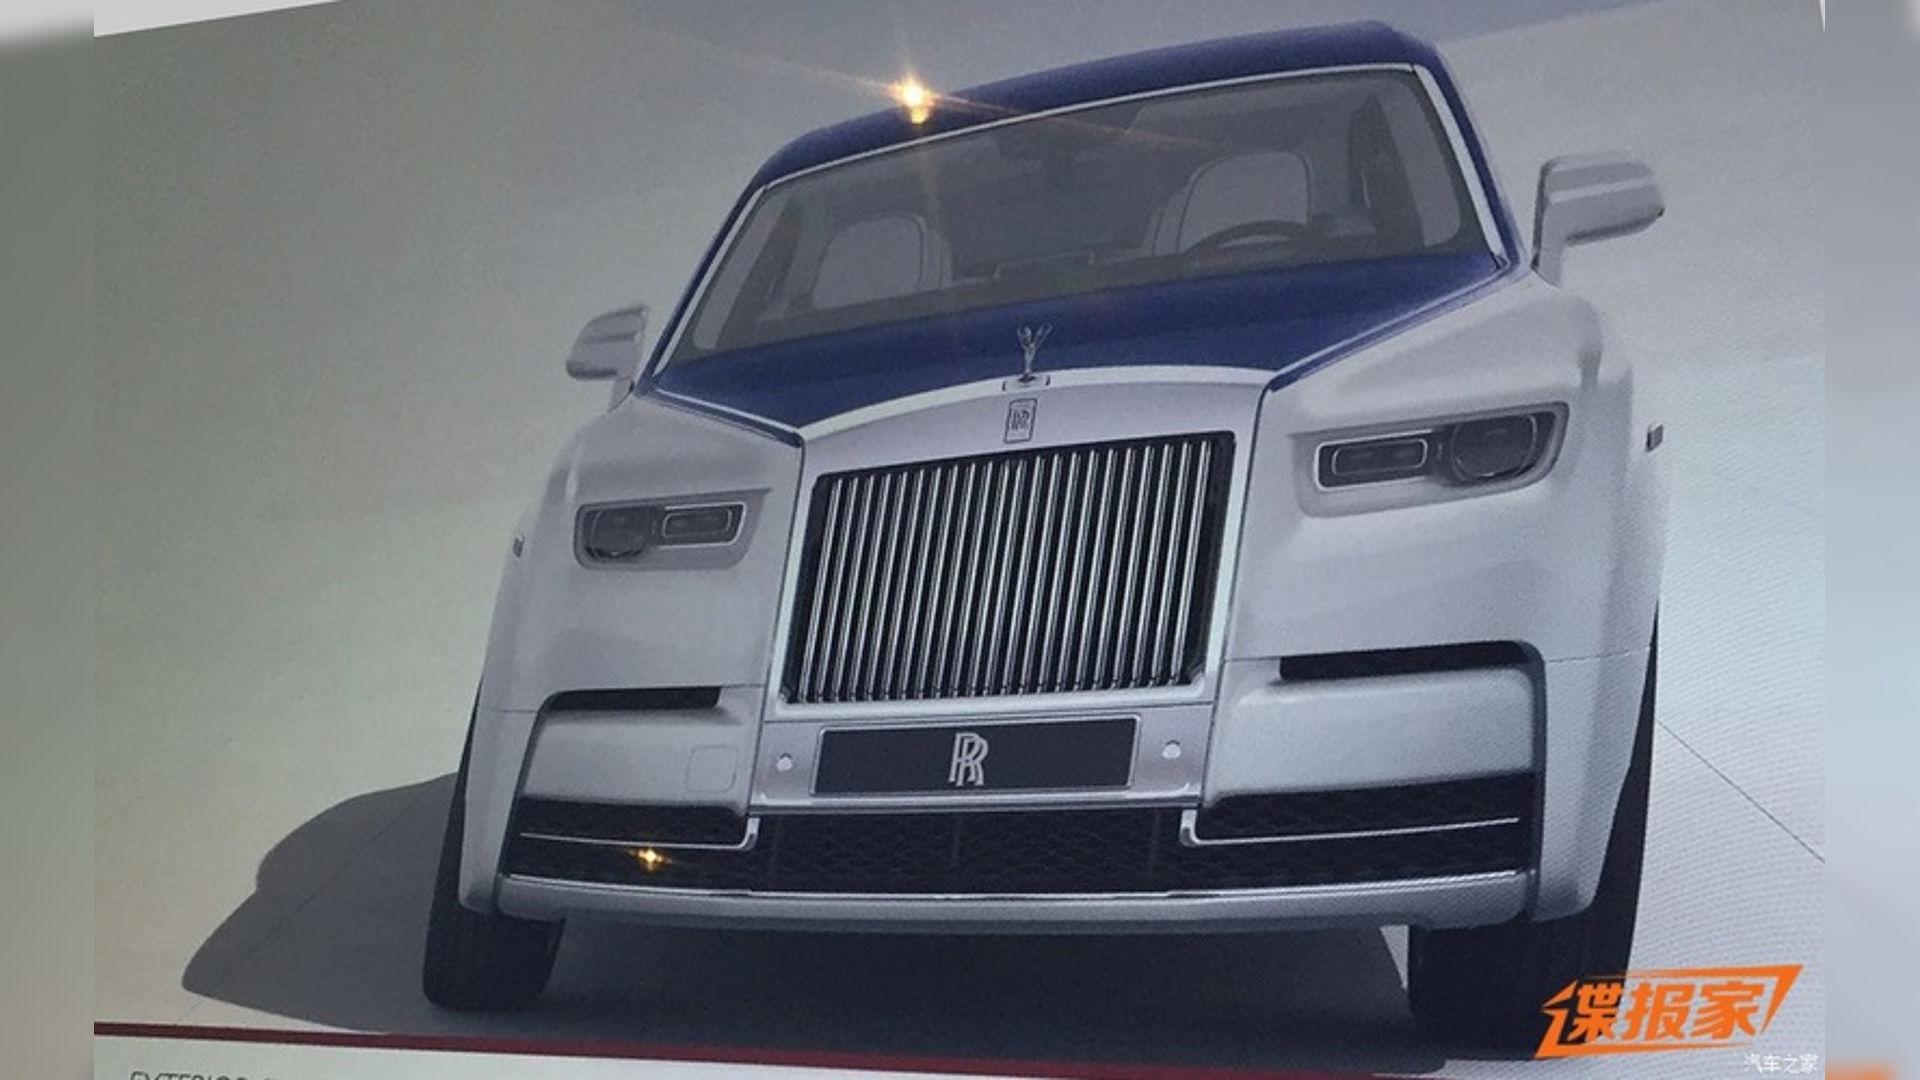 Leaked: First Picture Of The New Rolls Royce Phantom